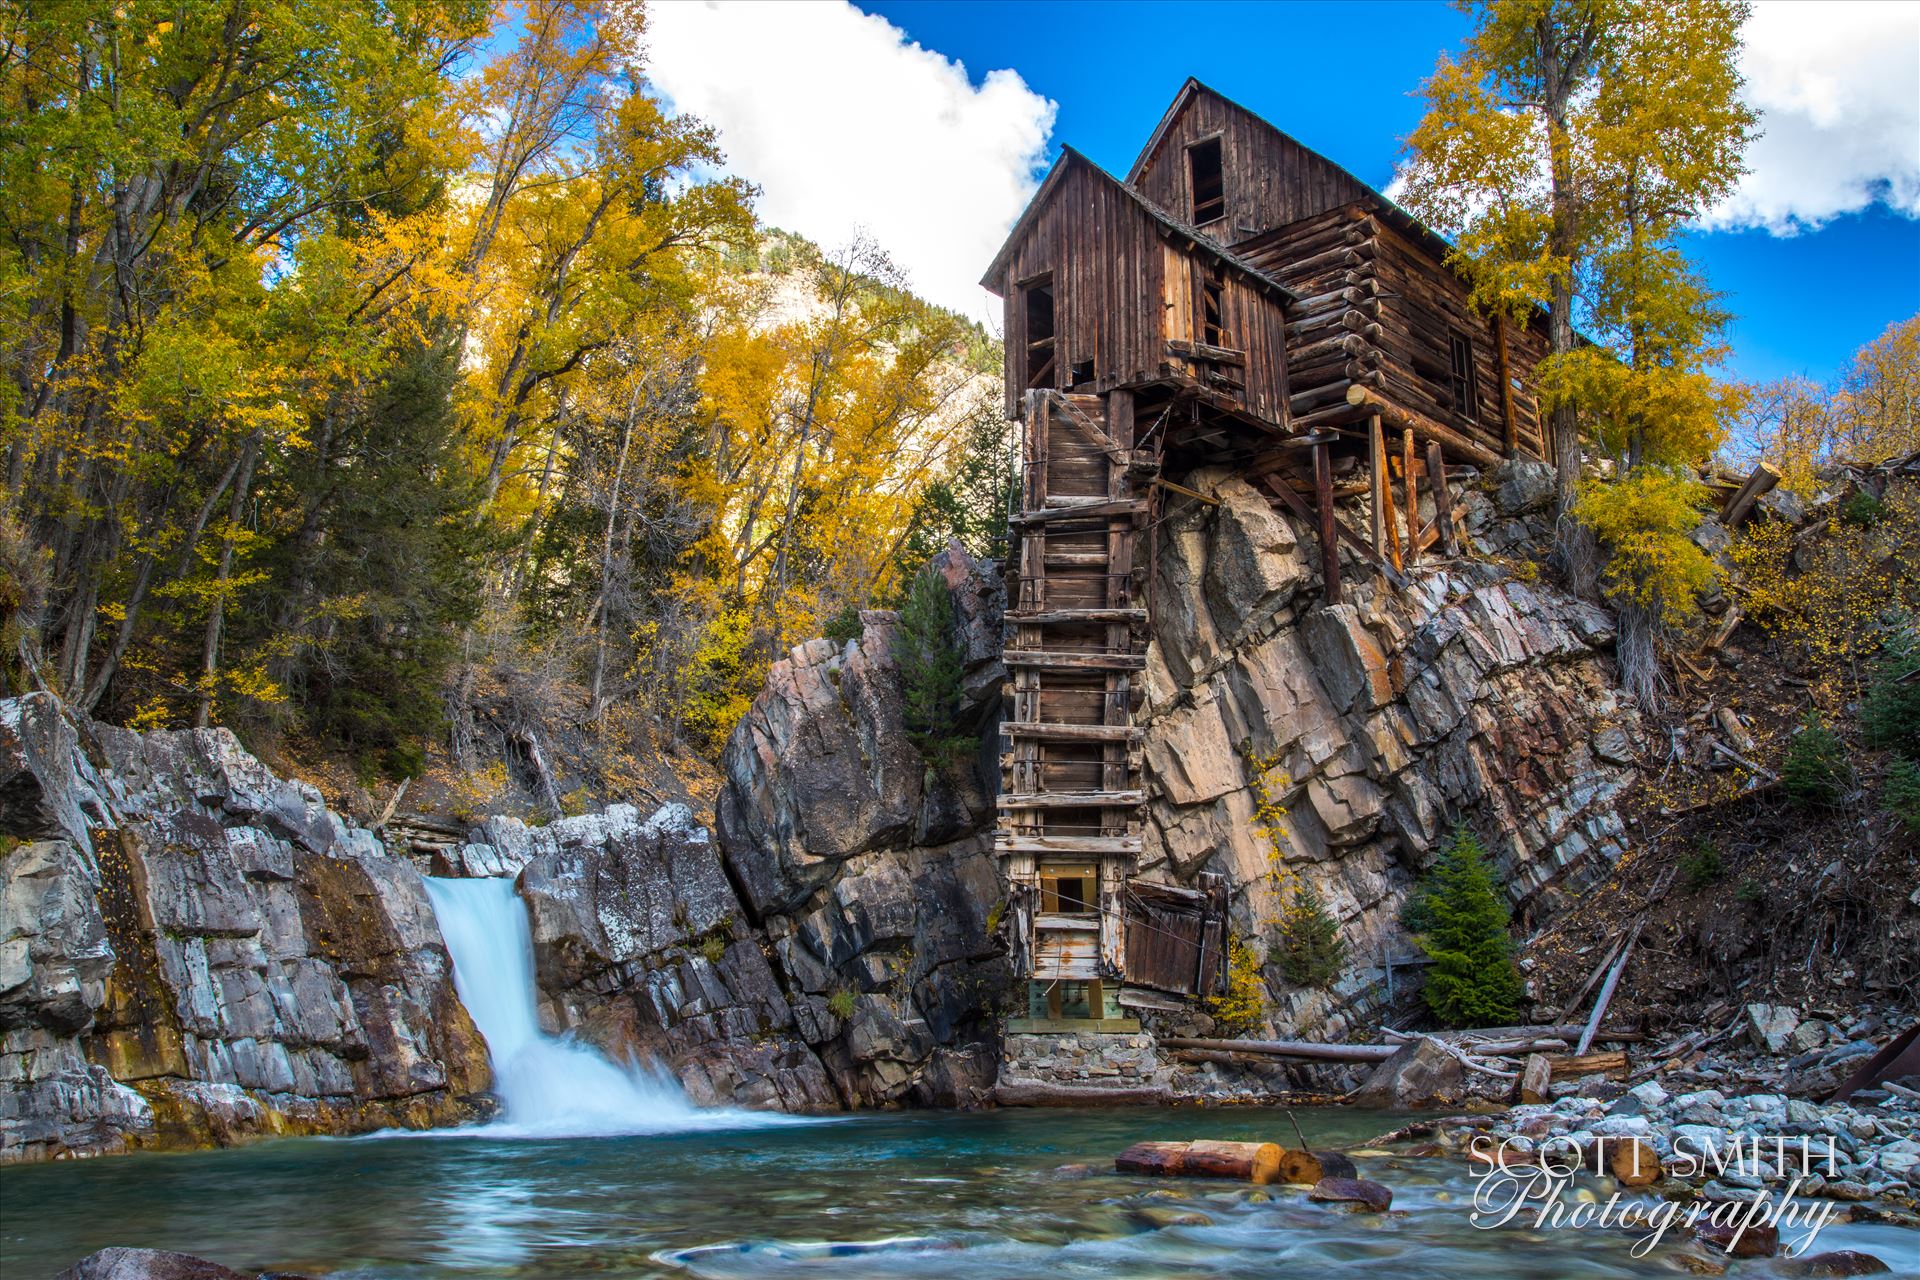 Crystal Mill, Colorado 07 - The Crystal Mill, or the Old Mill is an 1892 wooden powerhouse located on an outcrop above the Crystal River in Crystal, Colorado by Scott Smith Photos